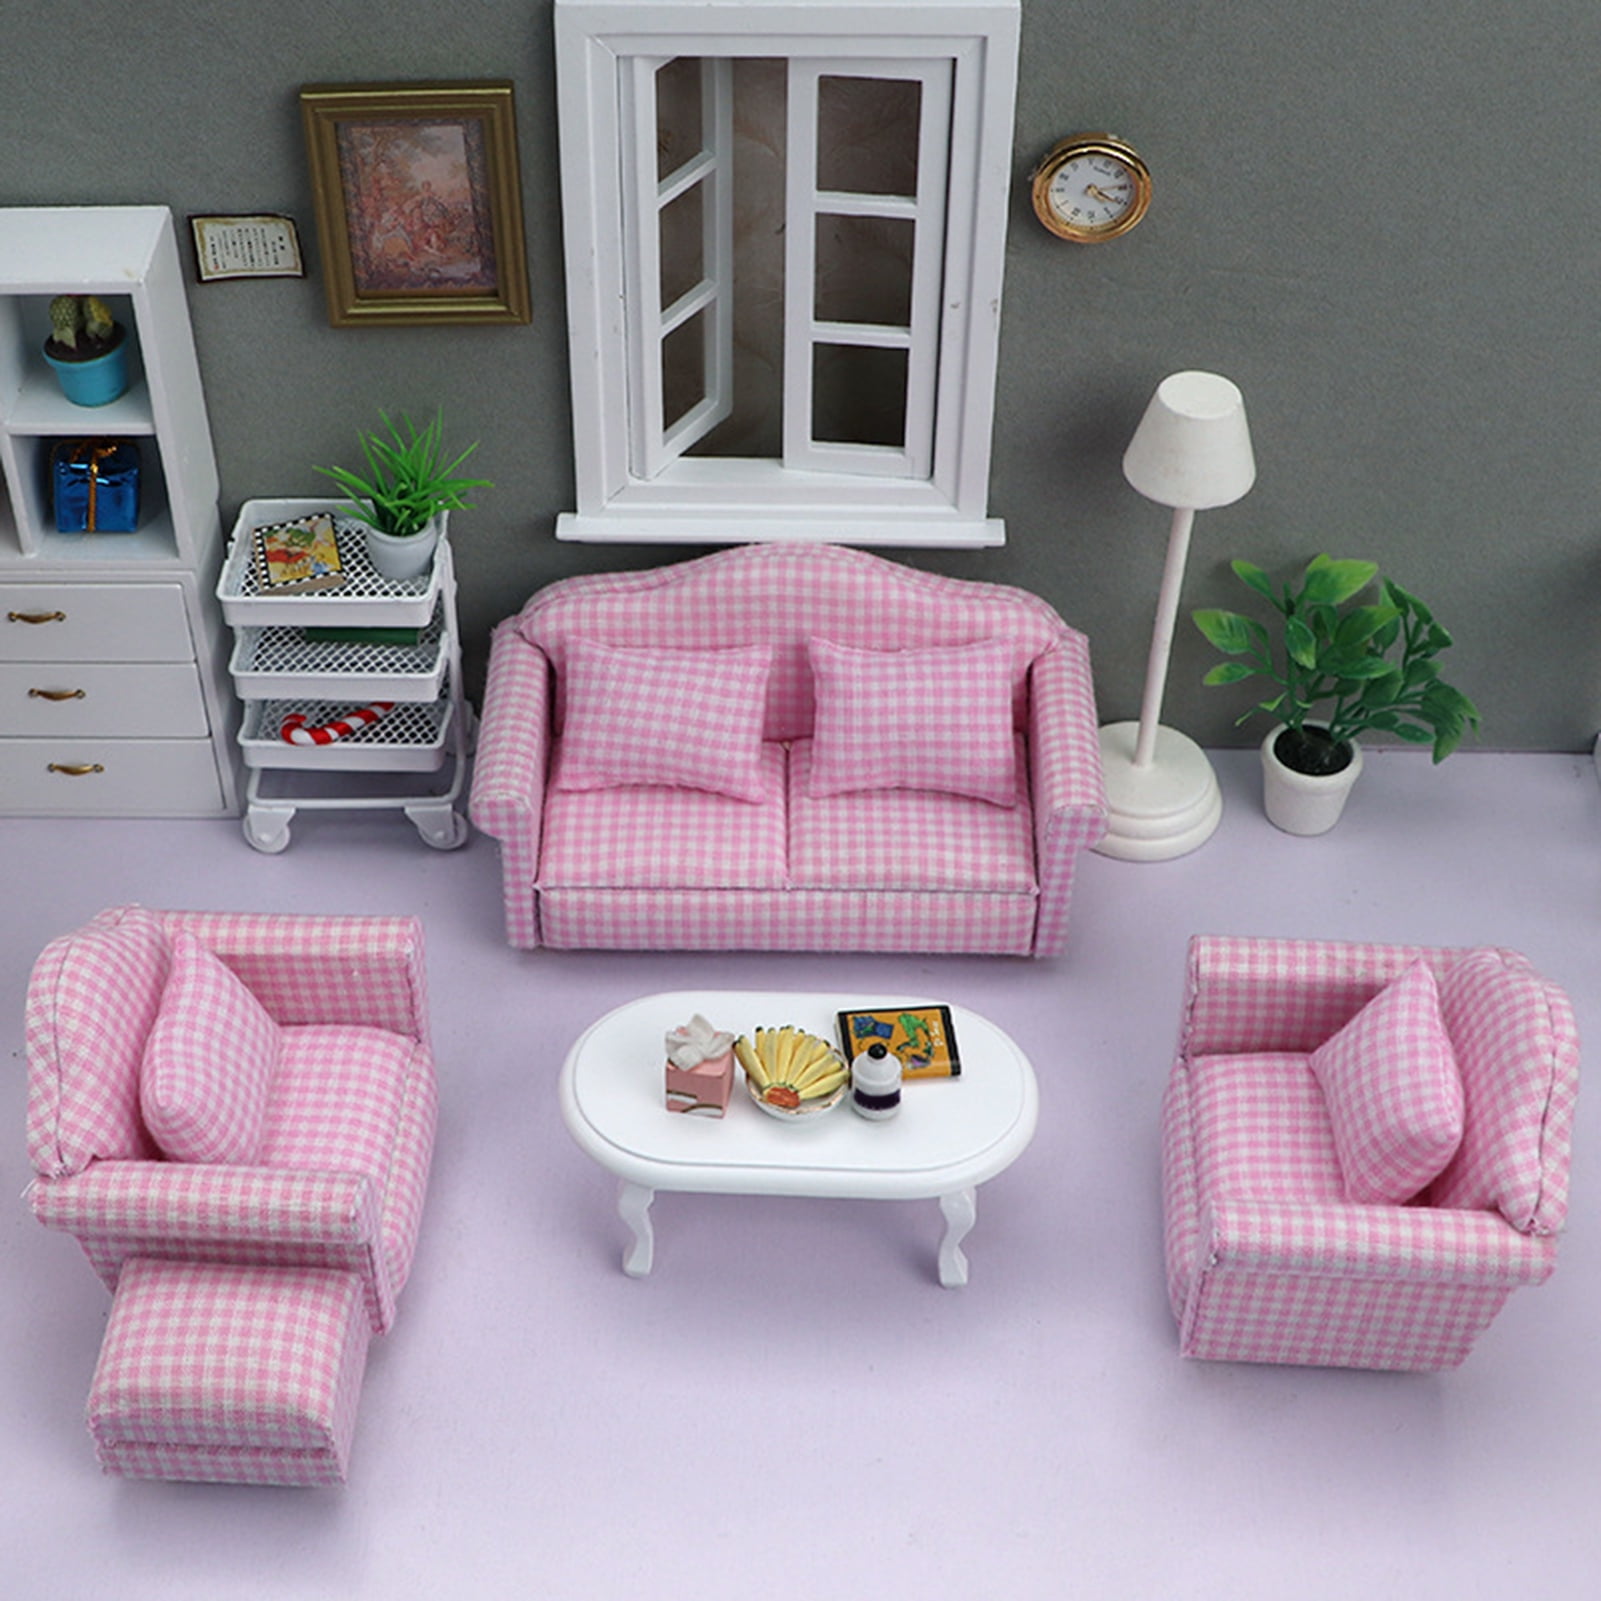 plant & dishes 1:12 Dollhouse Miniature Pink Checked Living Room set with rug 